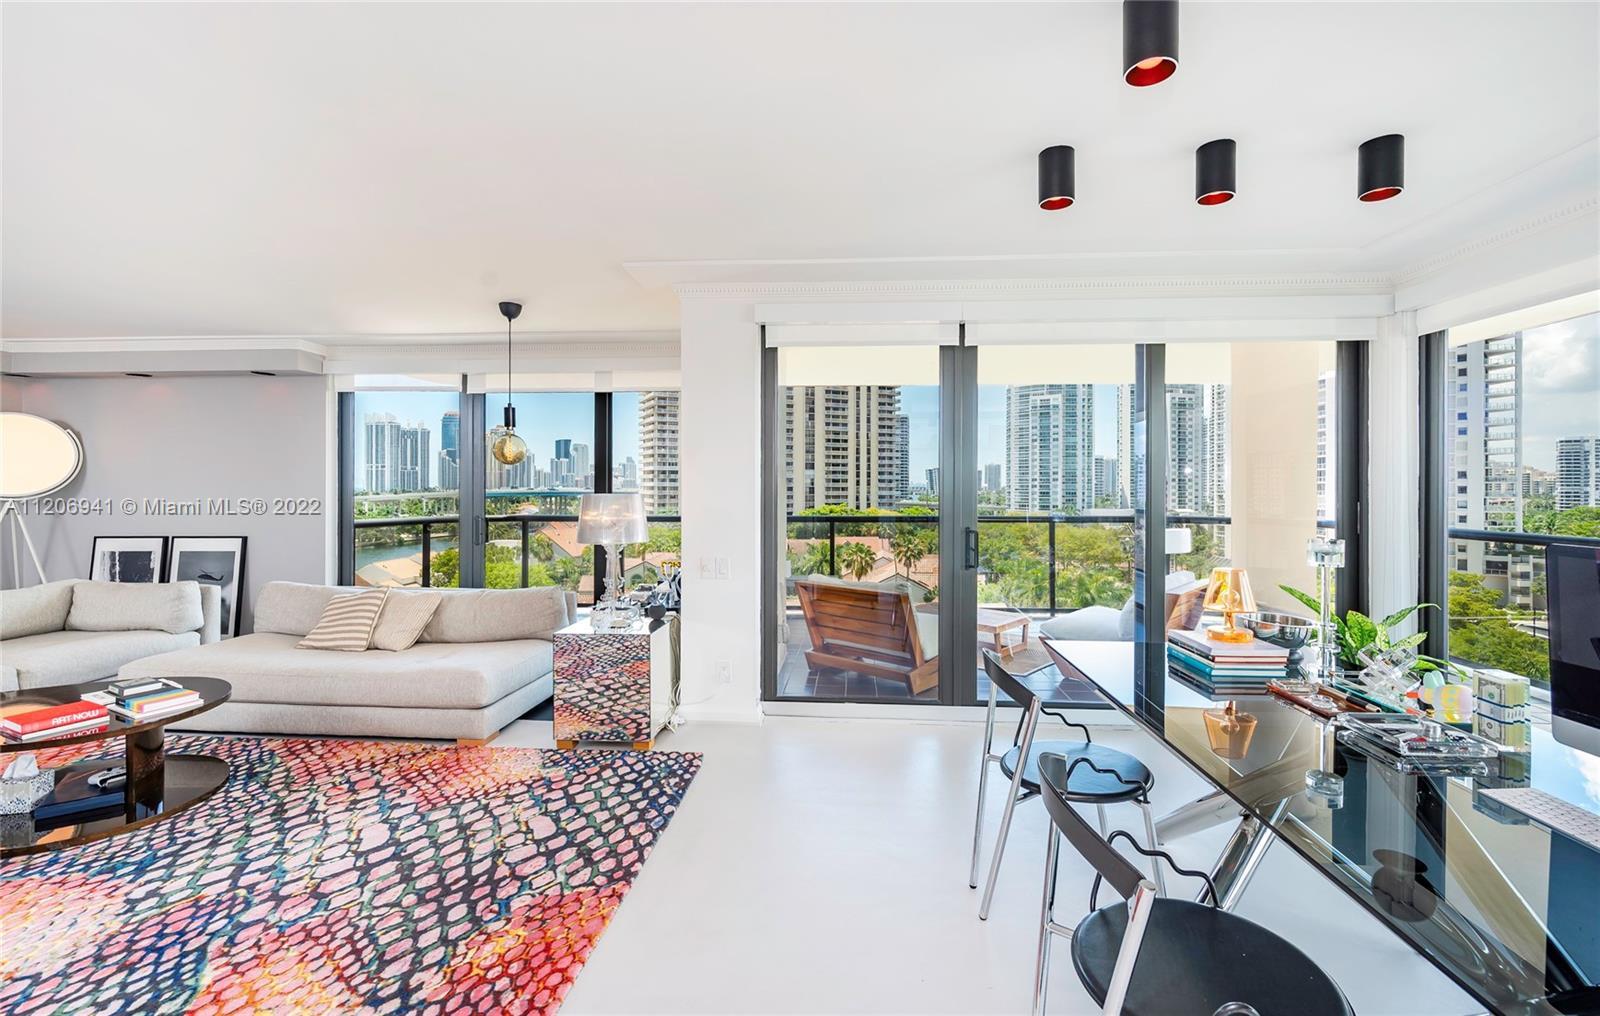 Welcome to Turnberry Isle South, One of the most desirable buildings in Aventura. This unit line is 